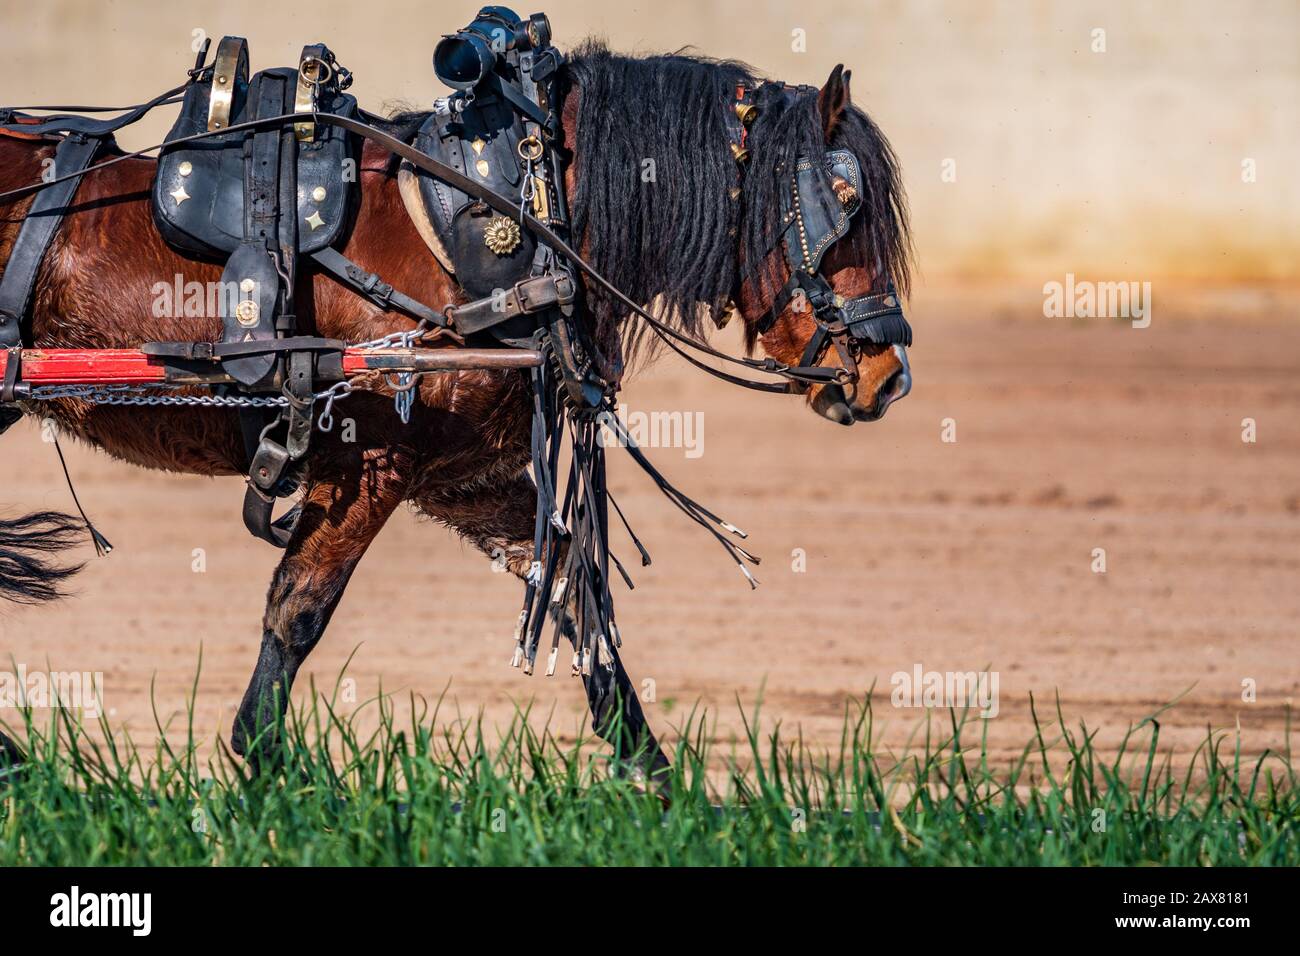 Work horse profile leading a cart over onion field Stock Photo